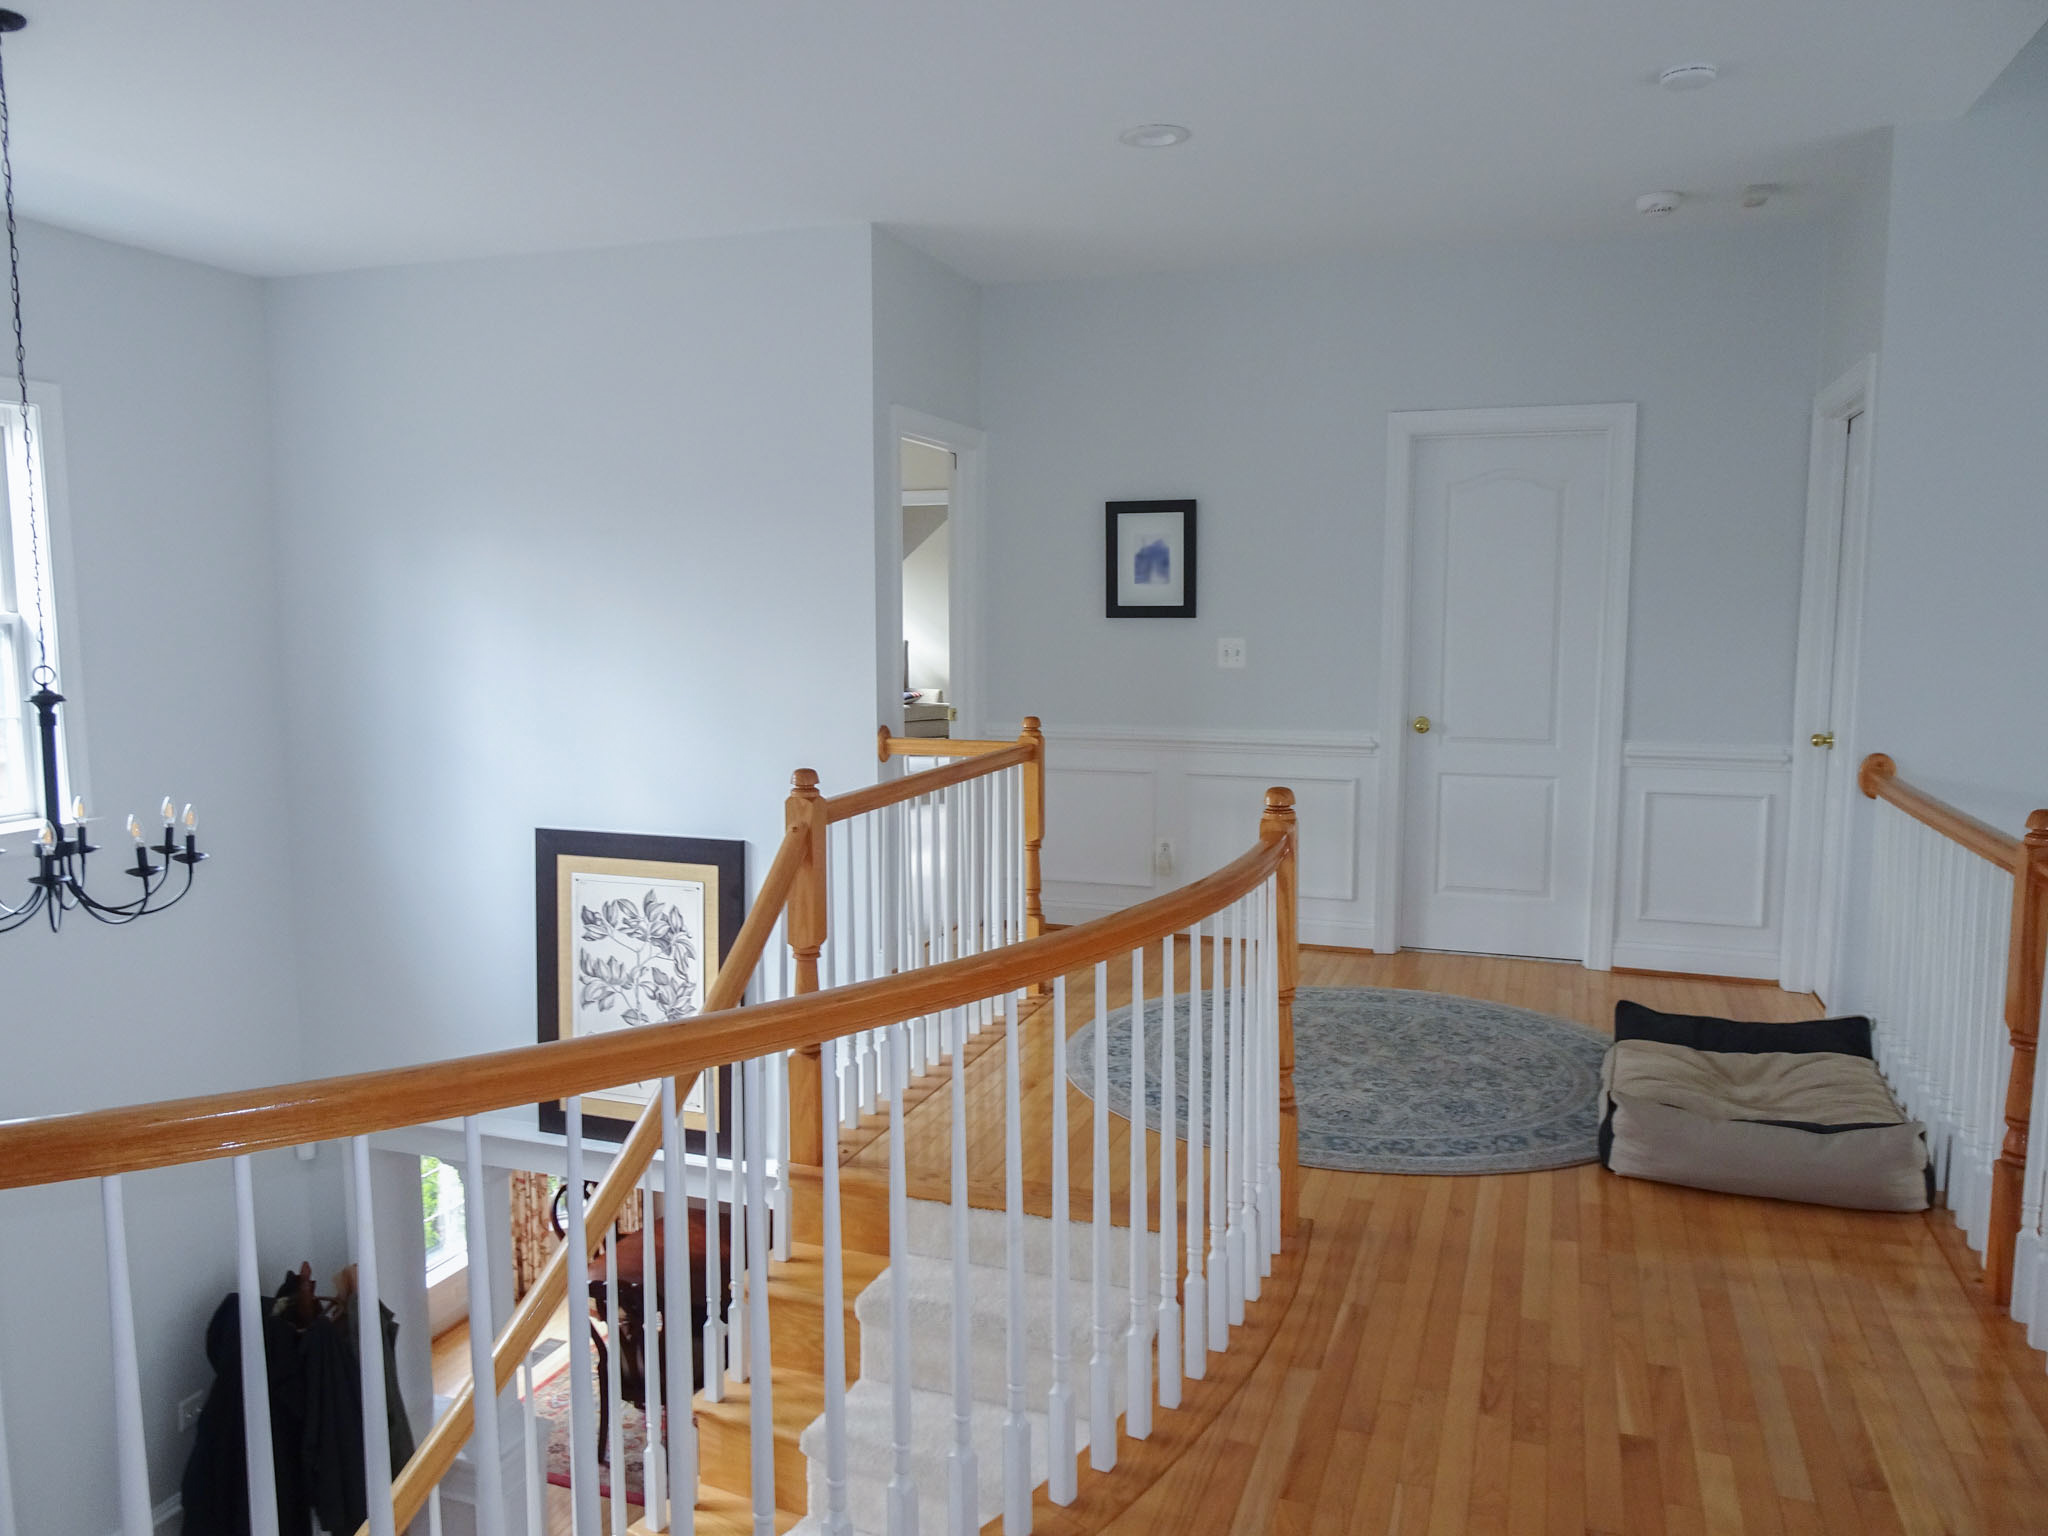 Interior Painting – Upstairs After